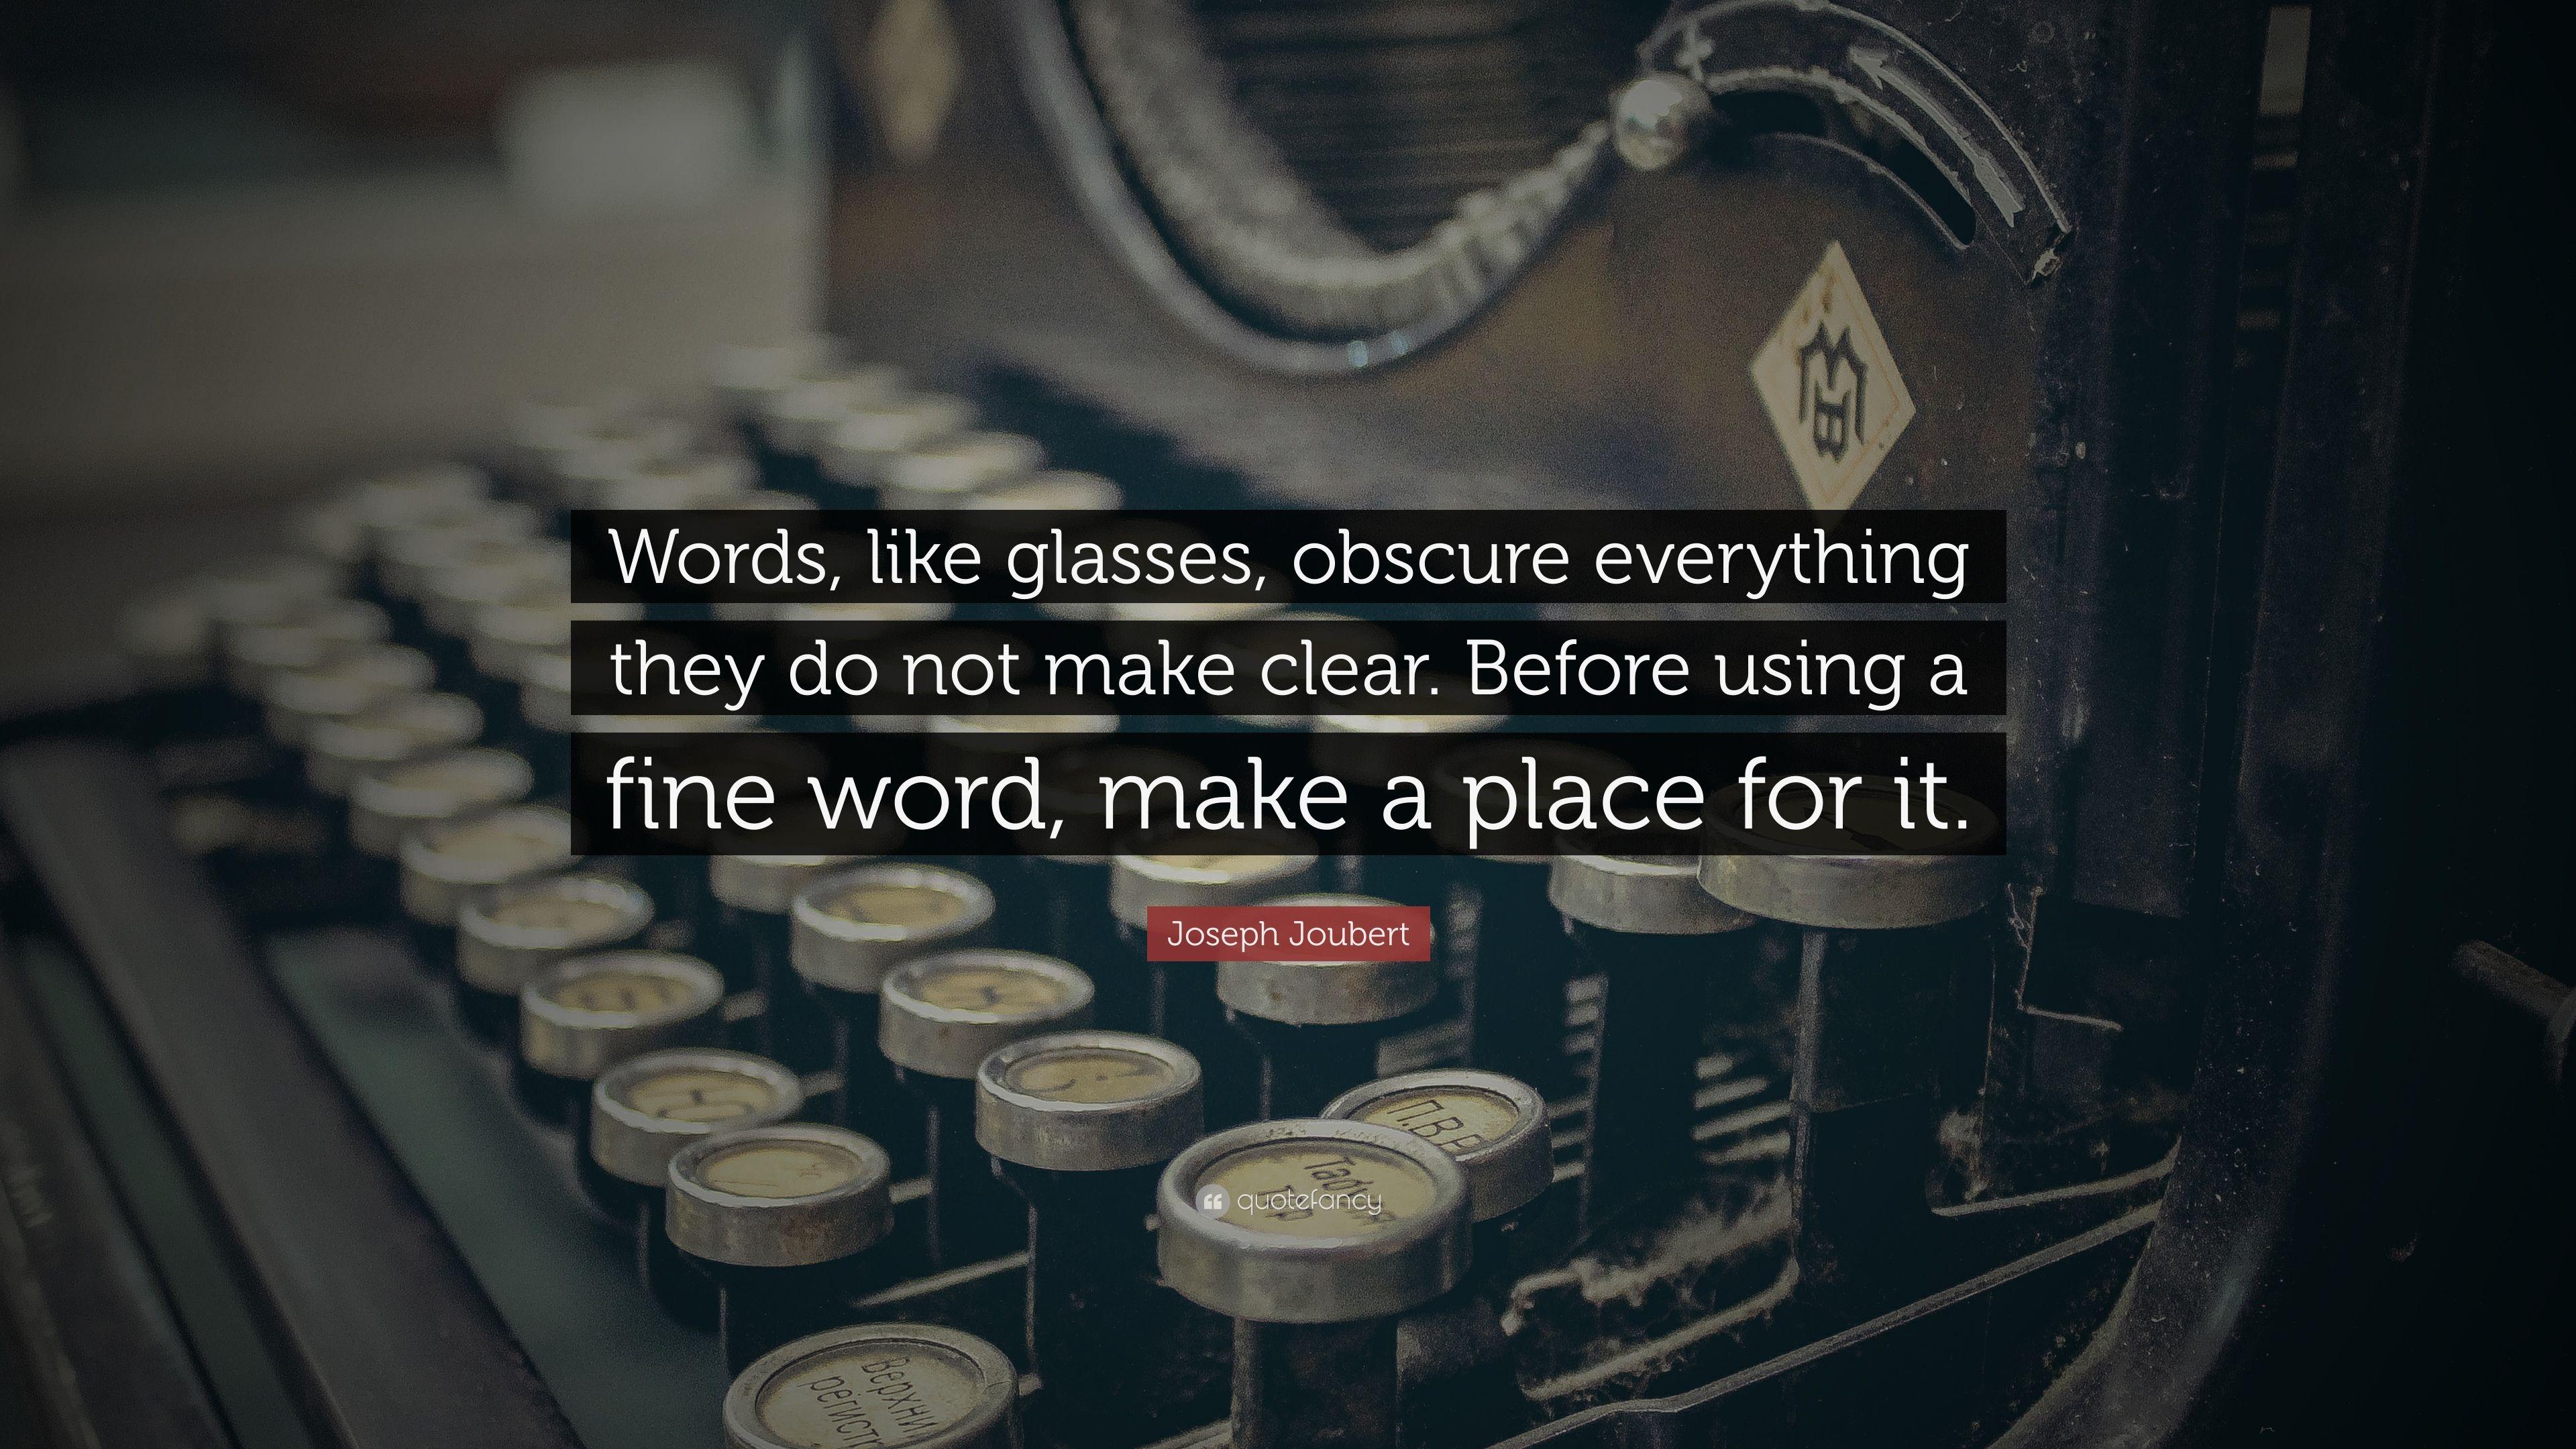 Joseph Joubert Quote: “Words, like glasses, obscure everything